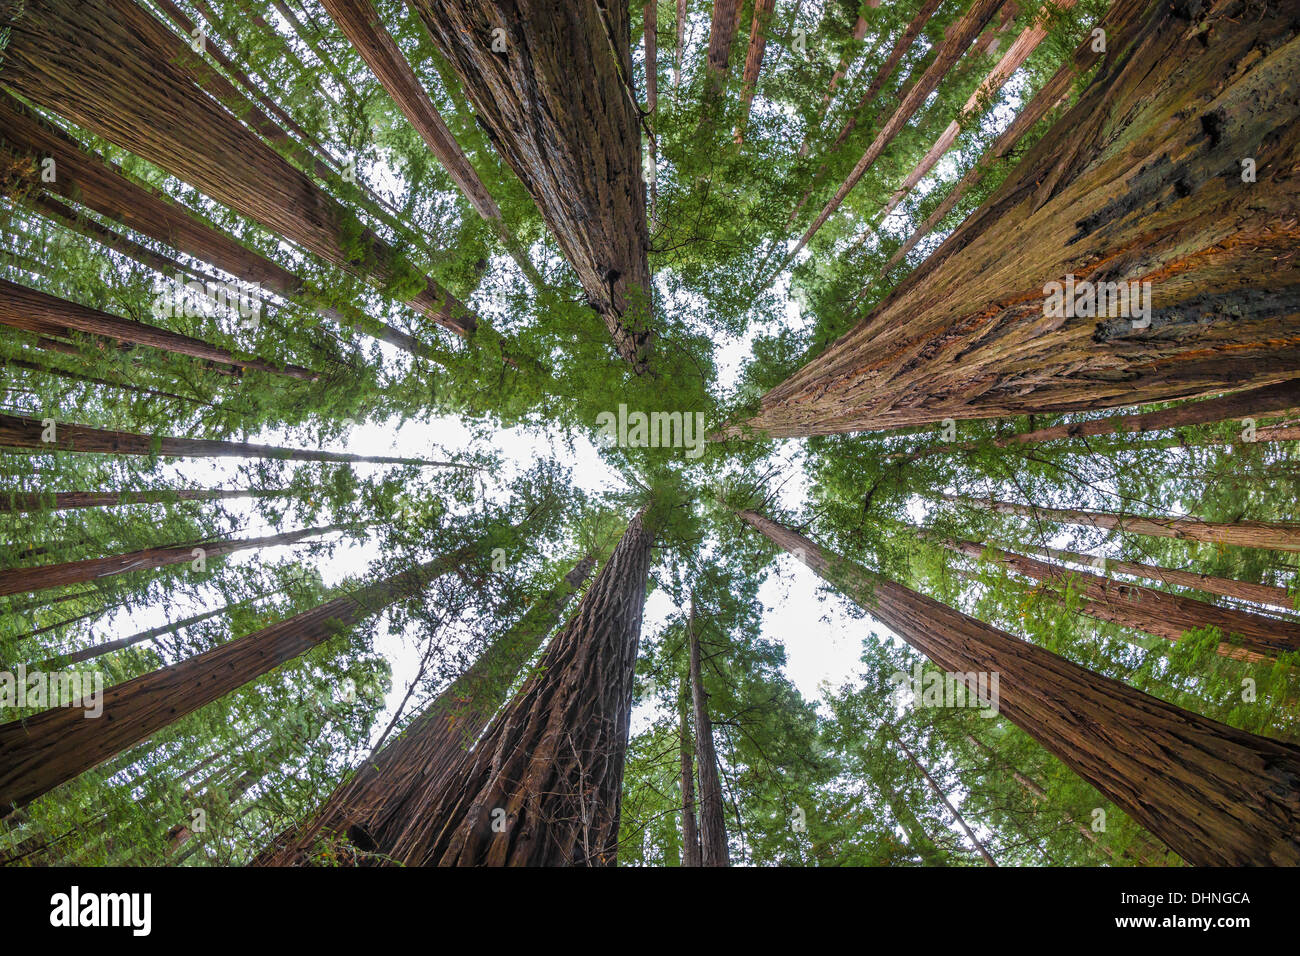 Coast Redwood, Sequoia sempervirens, forest in Humboldt Redwoods State Park near Dyerville, California, USA Stock Photo